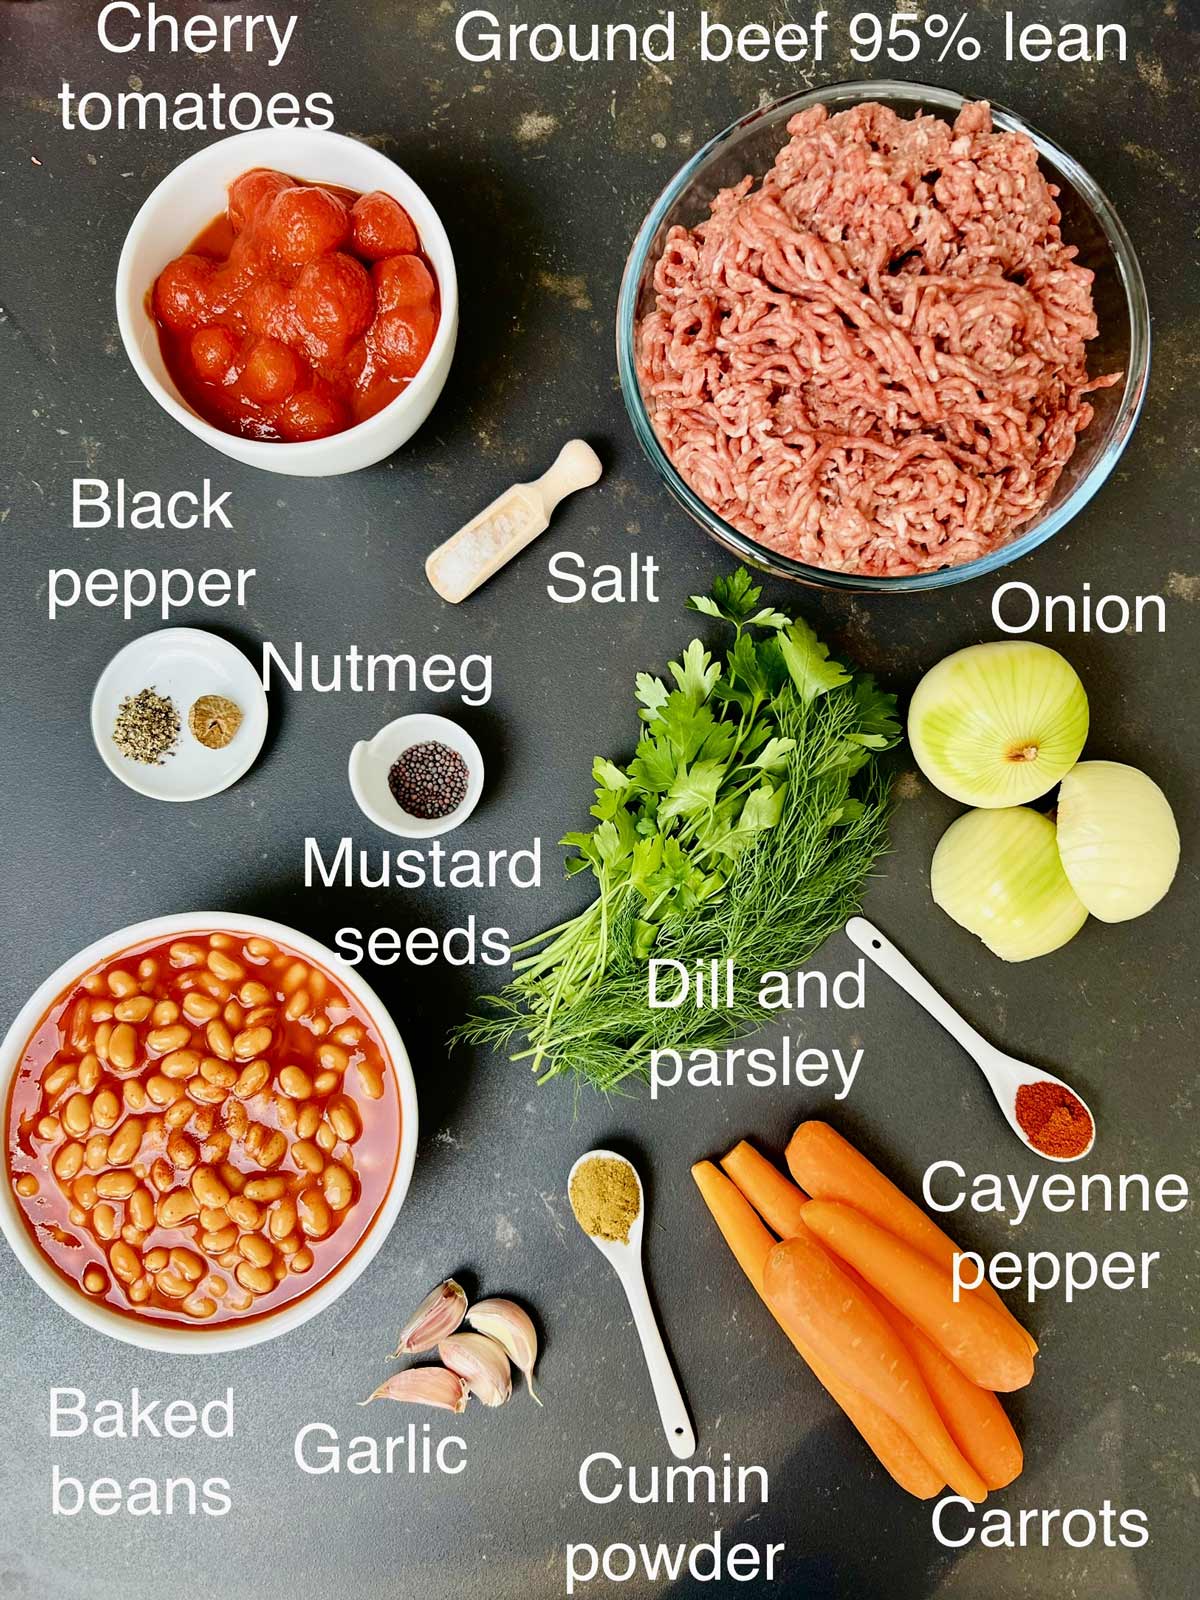 Ingredients (ground beef, canned cherry tomatoes, spices, herbs, baked beans, carrots and onion) needed for baked beans with ground beef.